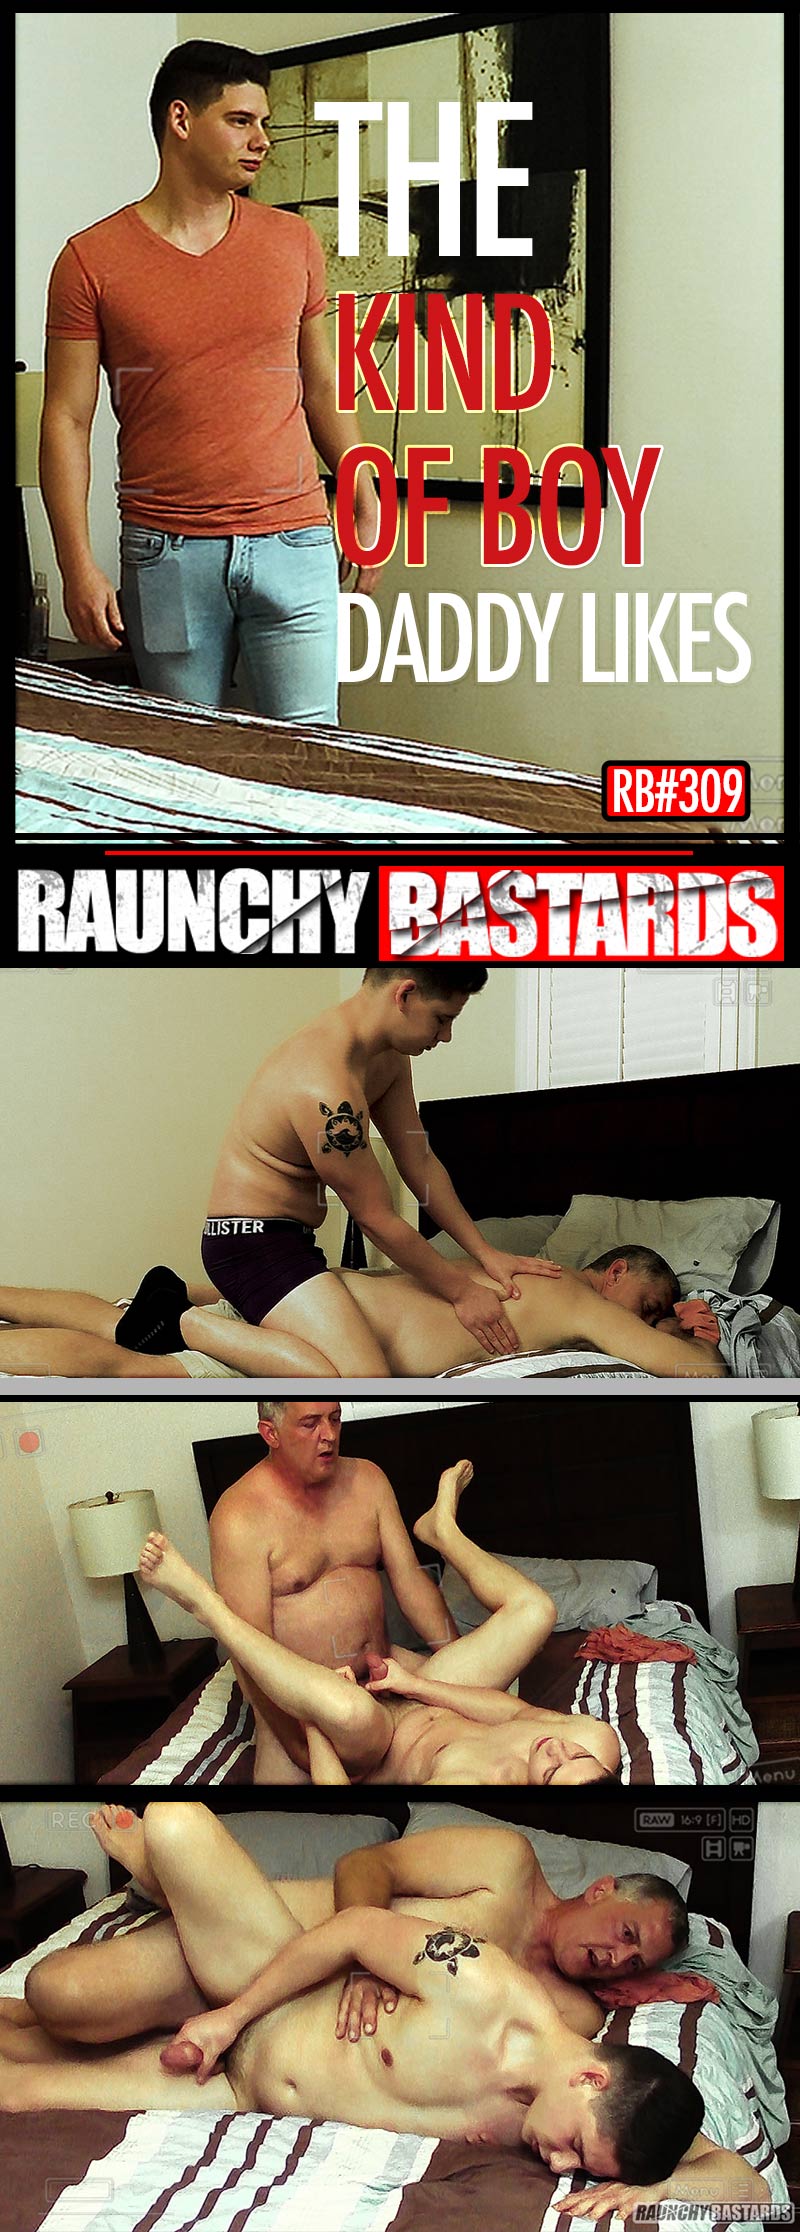 Episode #309: Clay Fucks Noah Reed in 'The Kind of Boy Daddy Likes' at Raunch Bastards